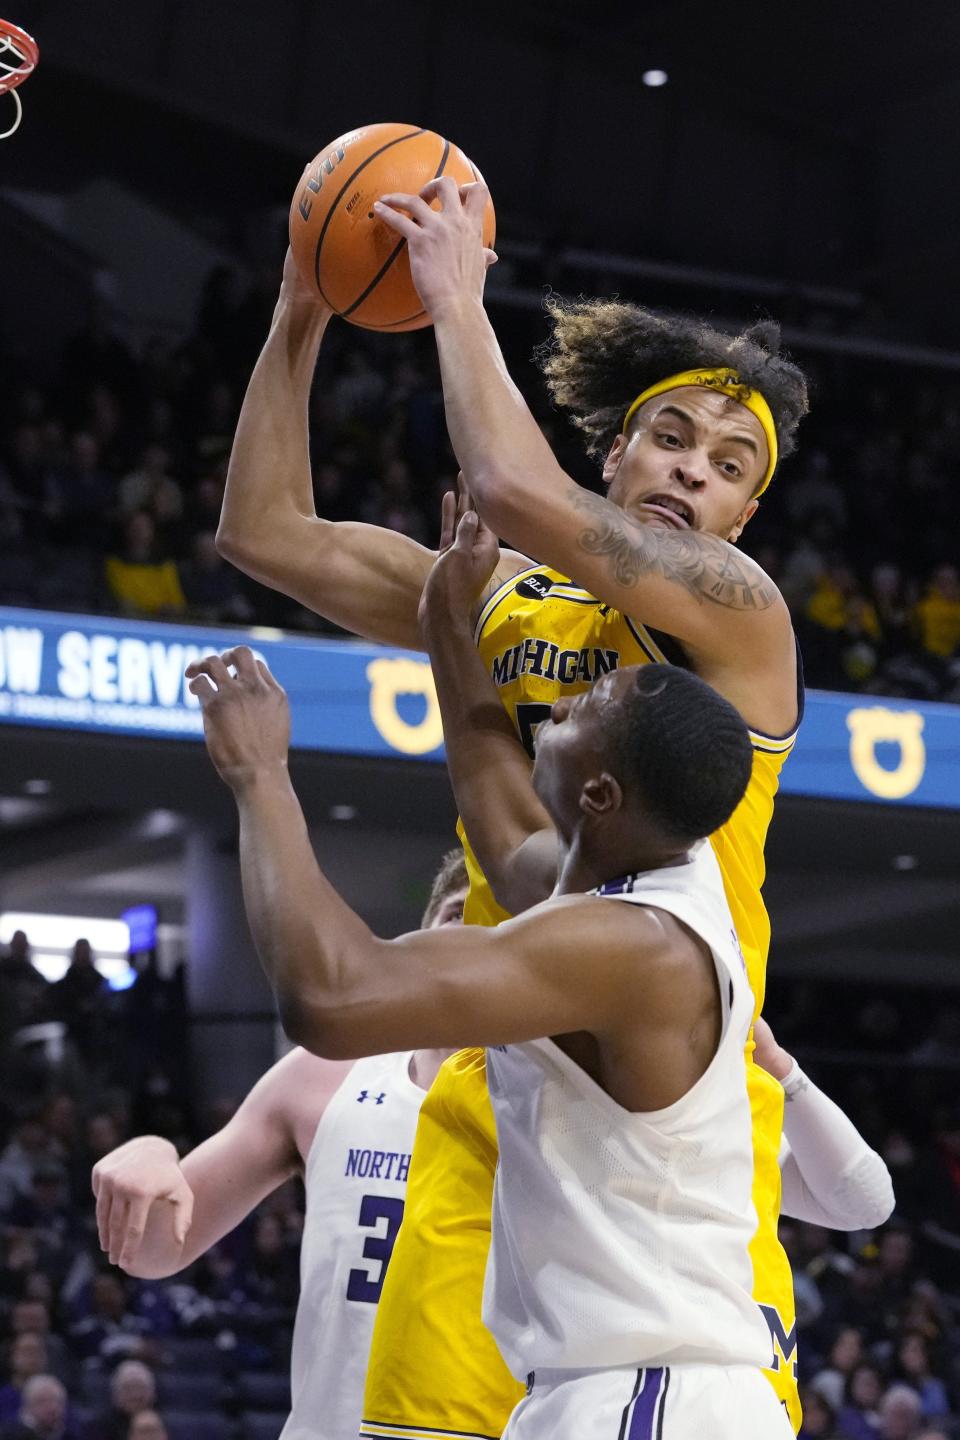 Michigan forward Terrance Williams II, top, rebounds the ball against Northwestern center Matthew Nicholson, left, and guard Chase Audige during the first half on Thursday, Feb. 2, 2023, in Evanston, Illinois.